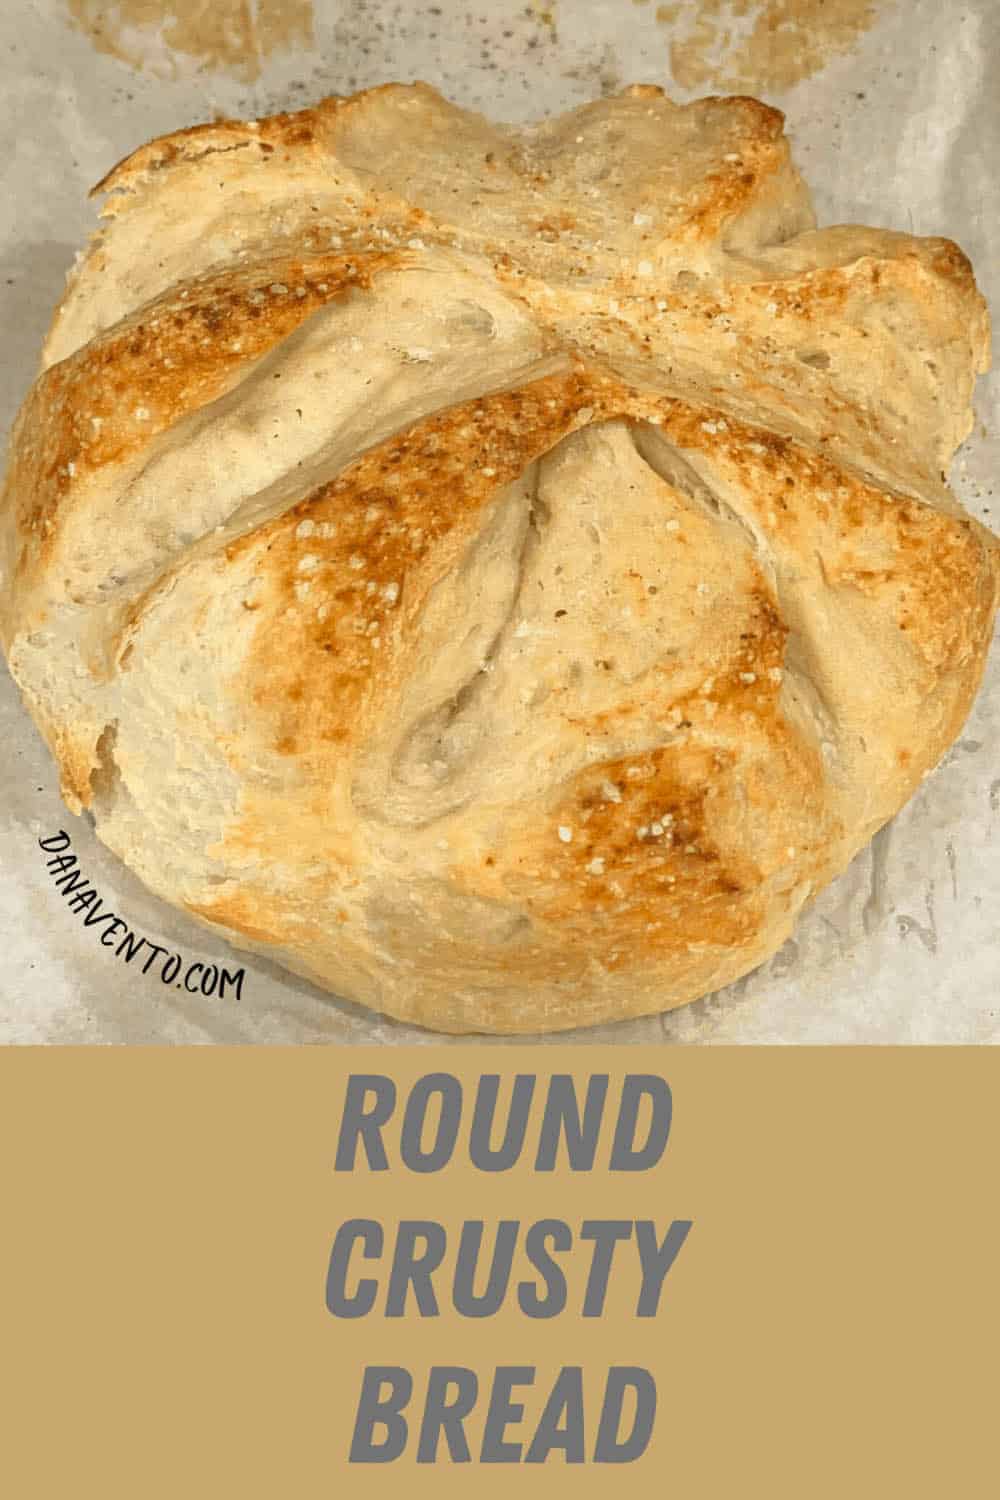 Crusty Bread round loaf baked 